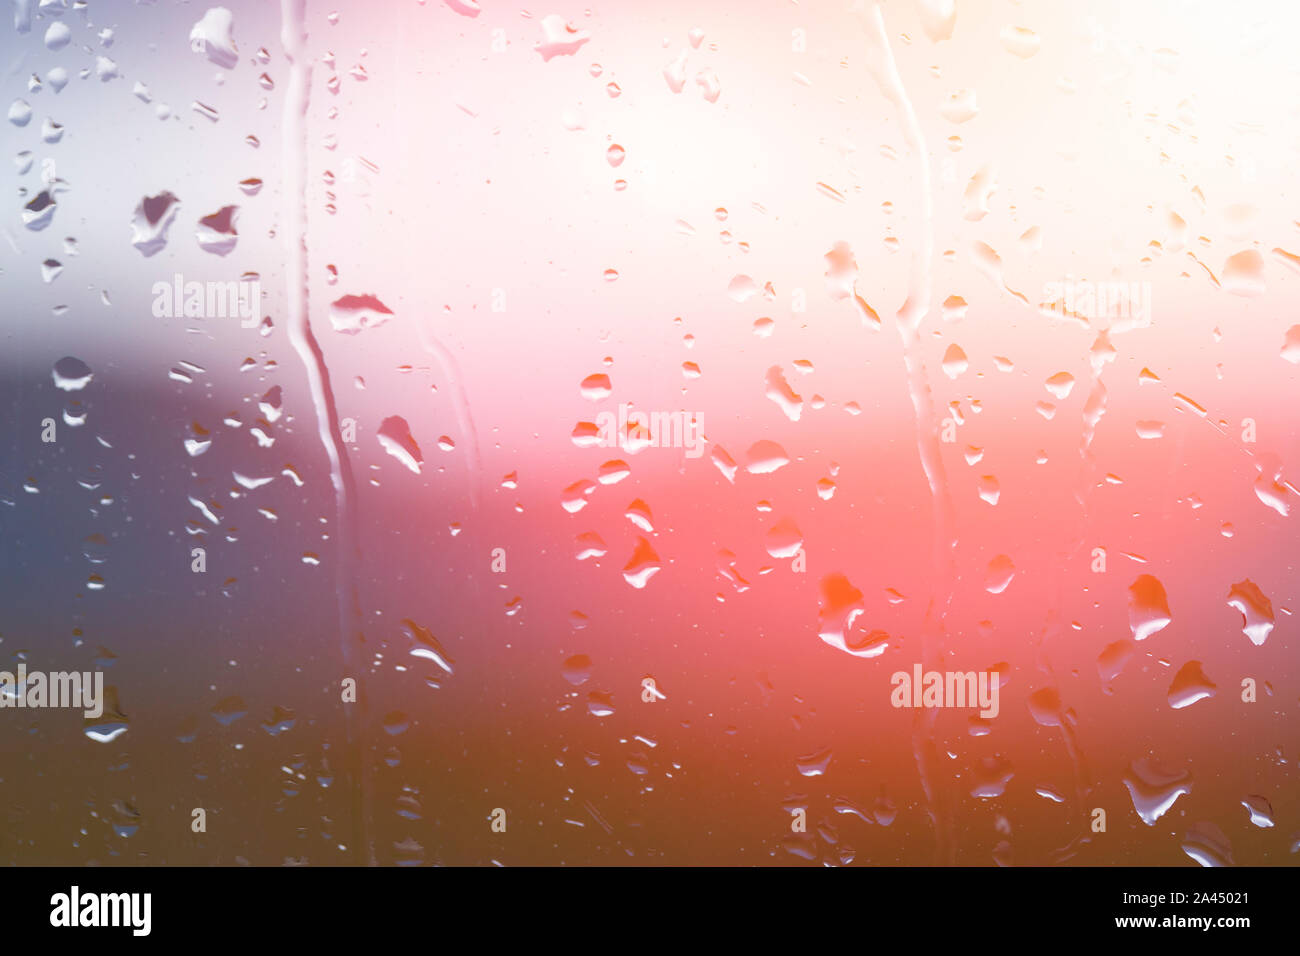 Drops of water on window glass after rain with dramatic blurred sunset on background. Idyllic tranquil nature wallpaper. Weather forecast. Stock Photo